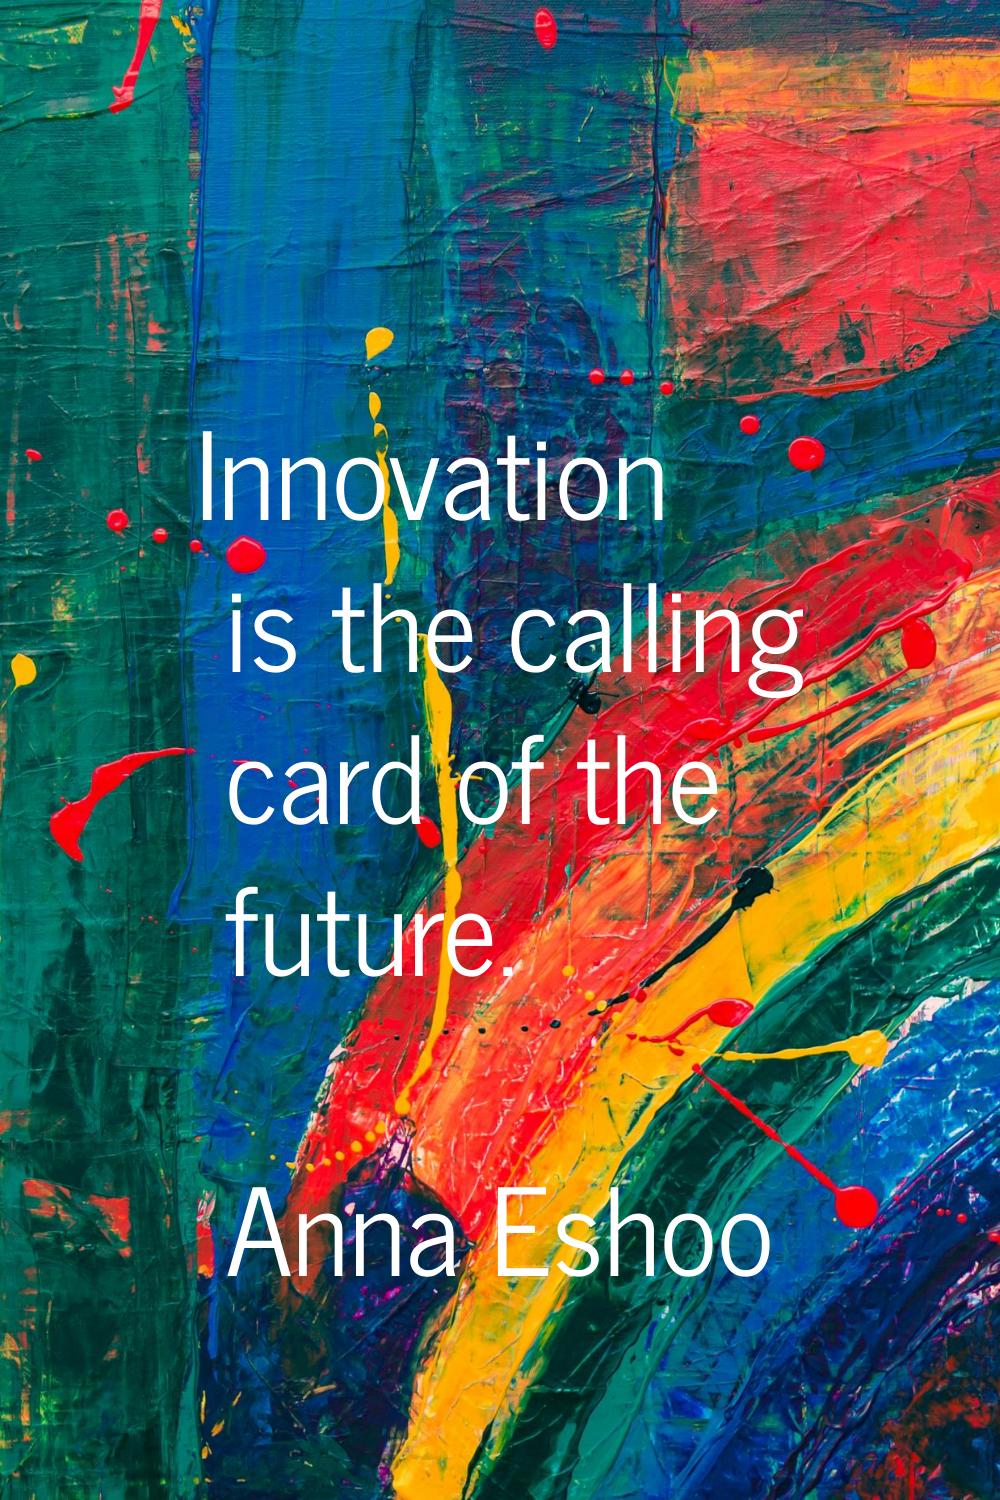 Innovation is the calling card of the future.